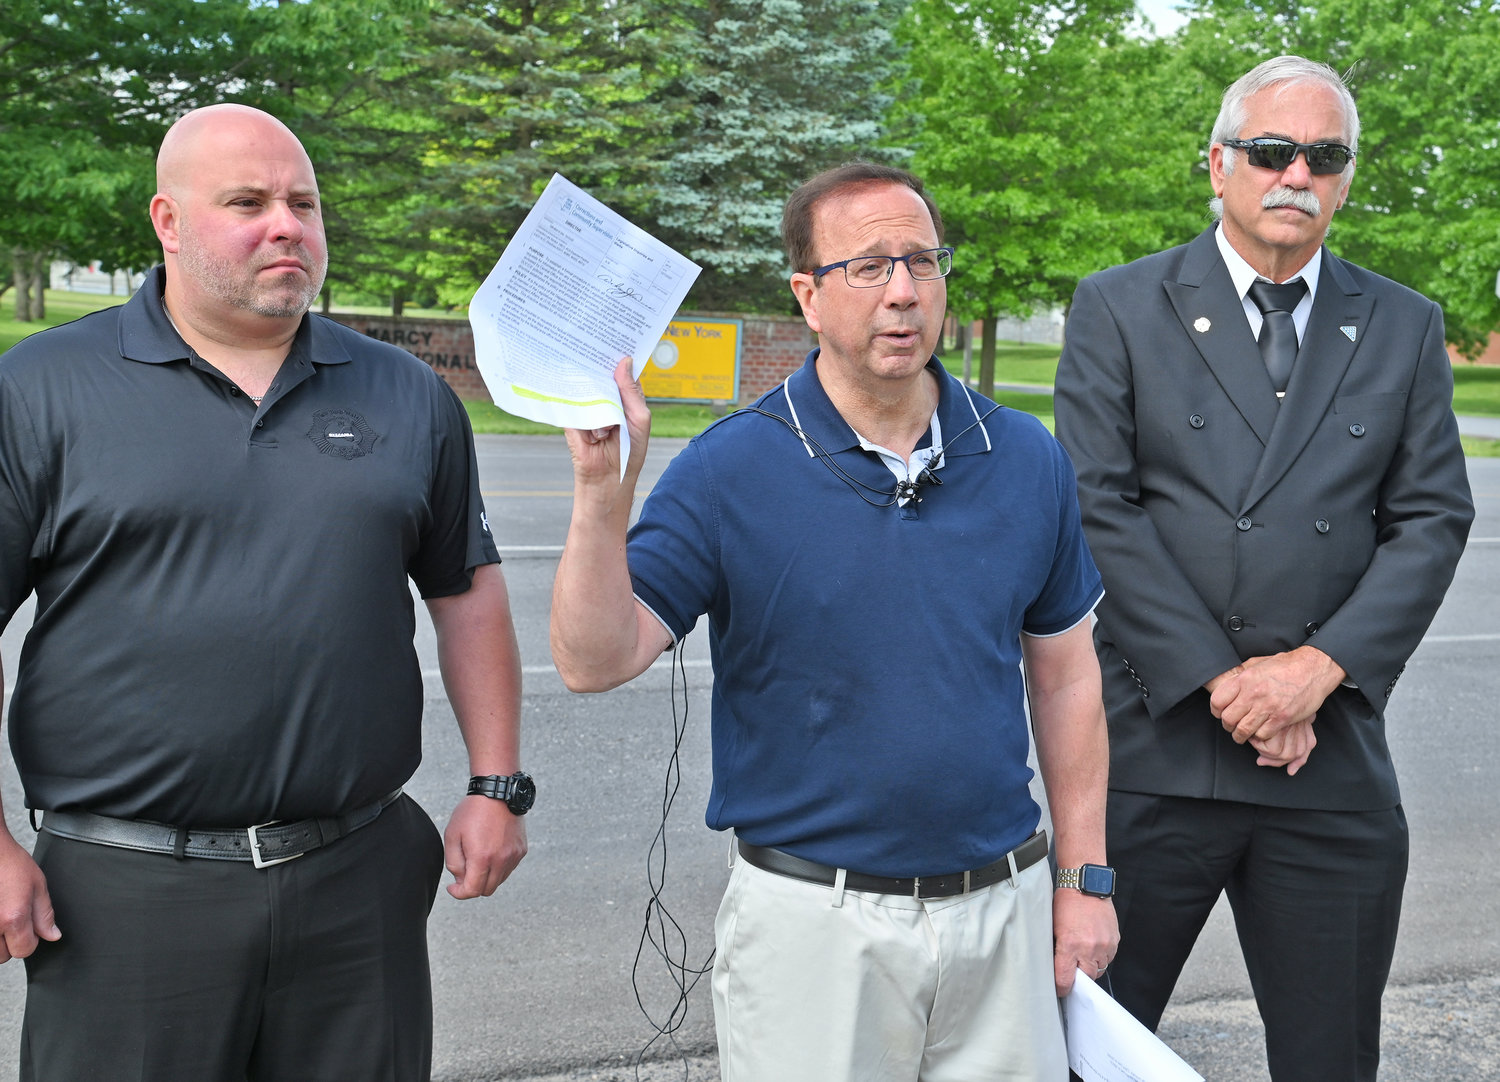 State Sen. Joseph A. Griffo, flanked by Brian Hluska and Don Roberts of the  New York State Correctional Officers & Police Benevolent Association, speaks with the media following an unannounced visit to the Marcy Correctional Facility on Friday.